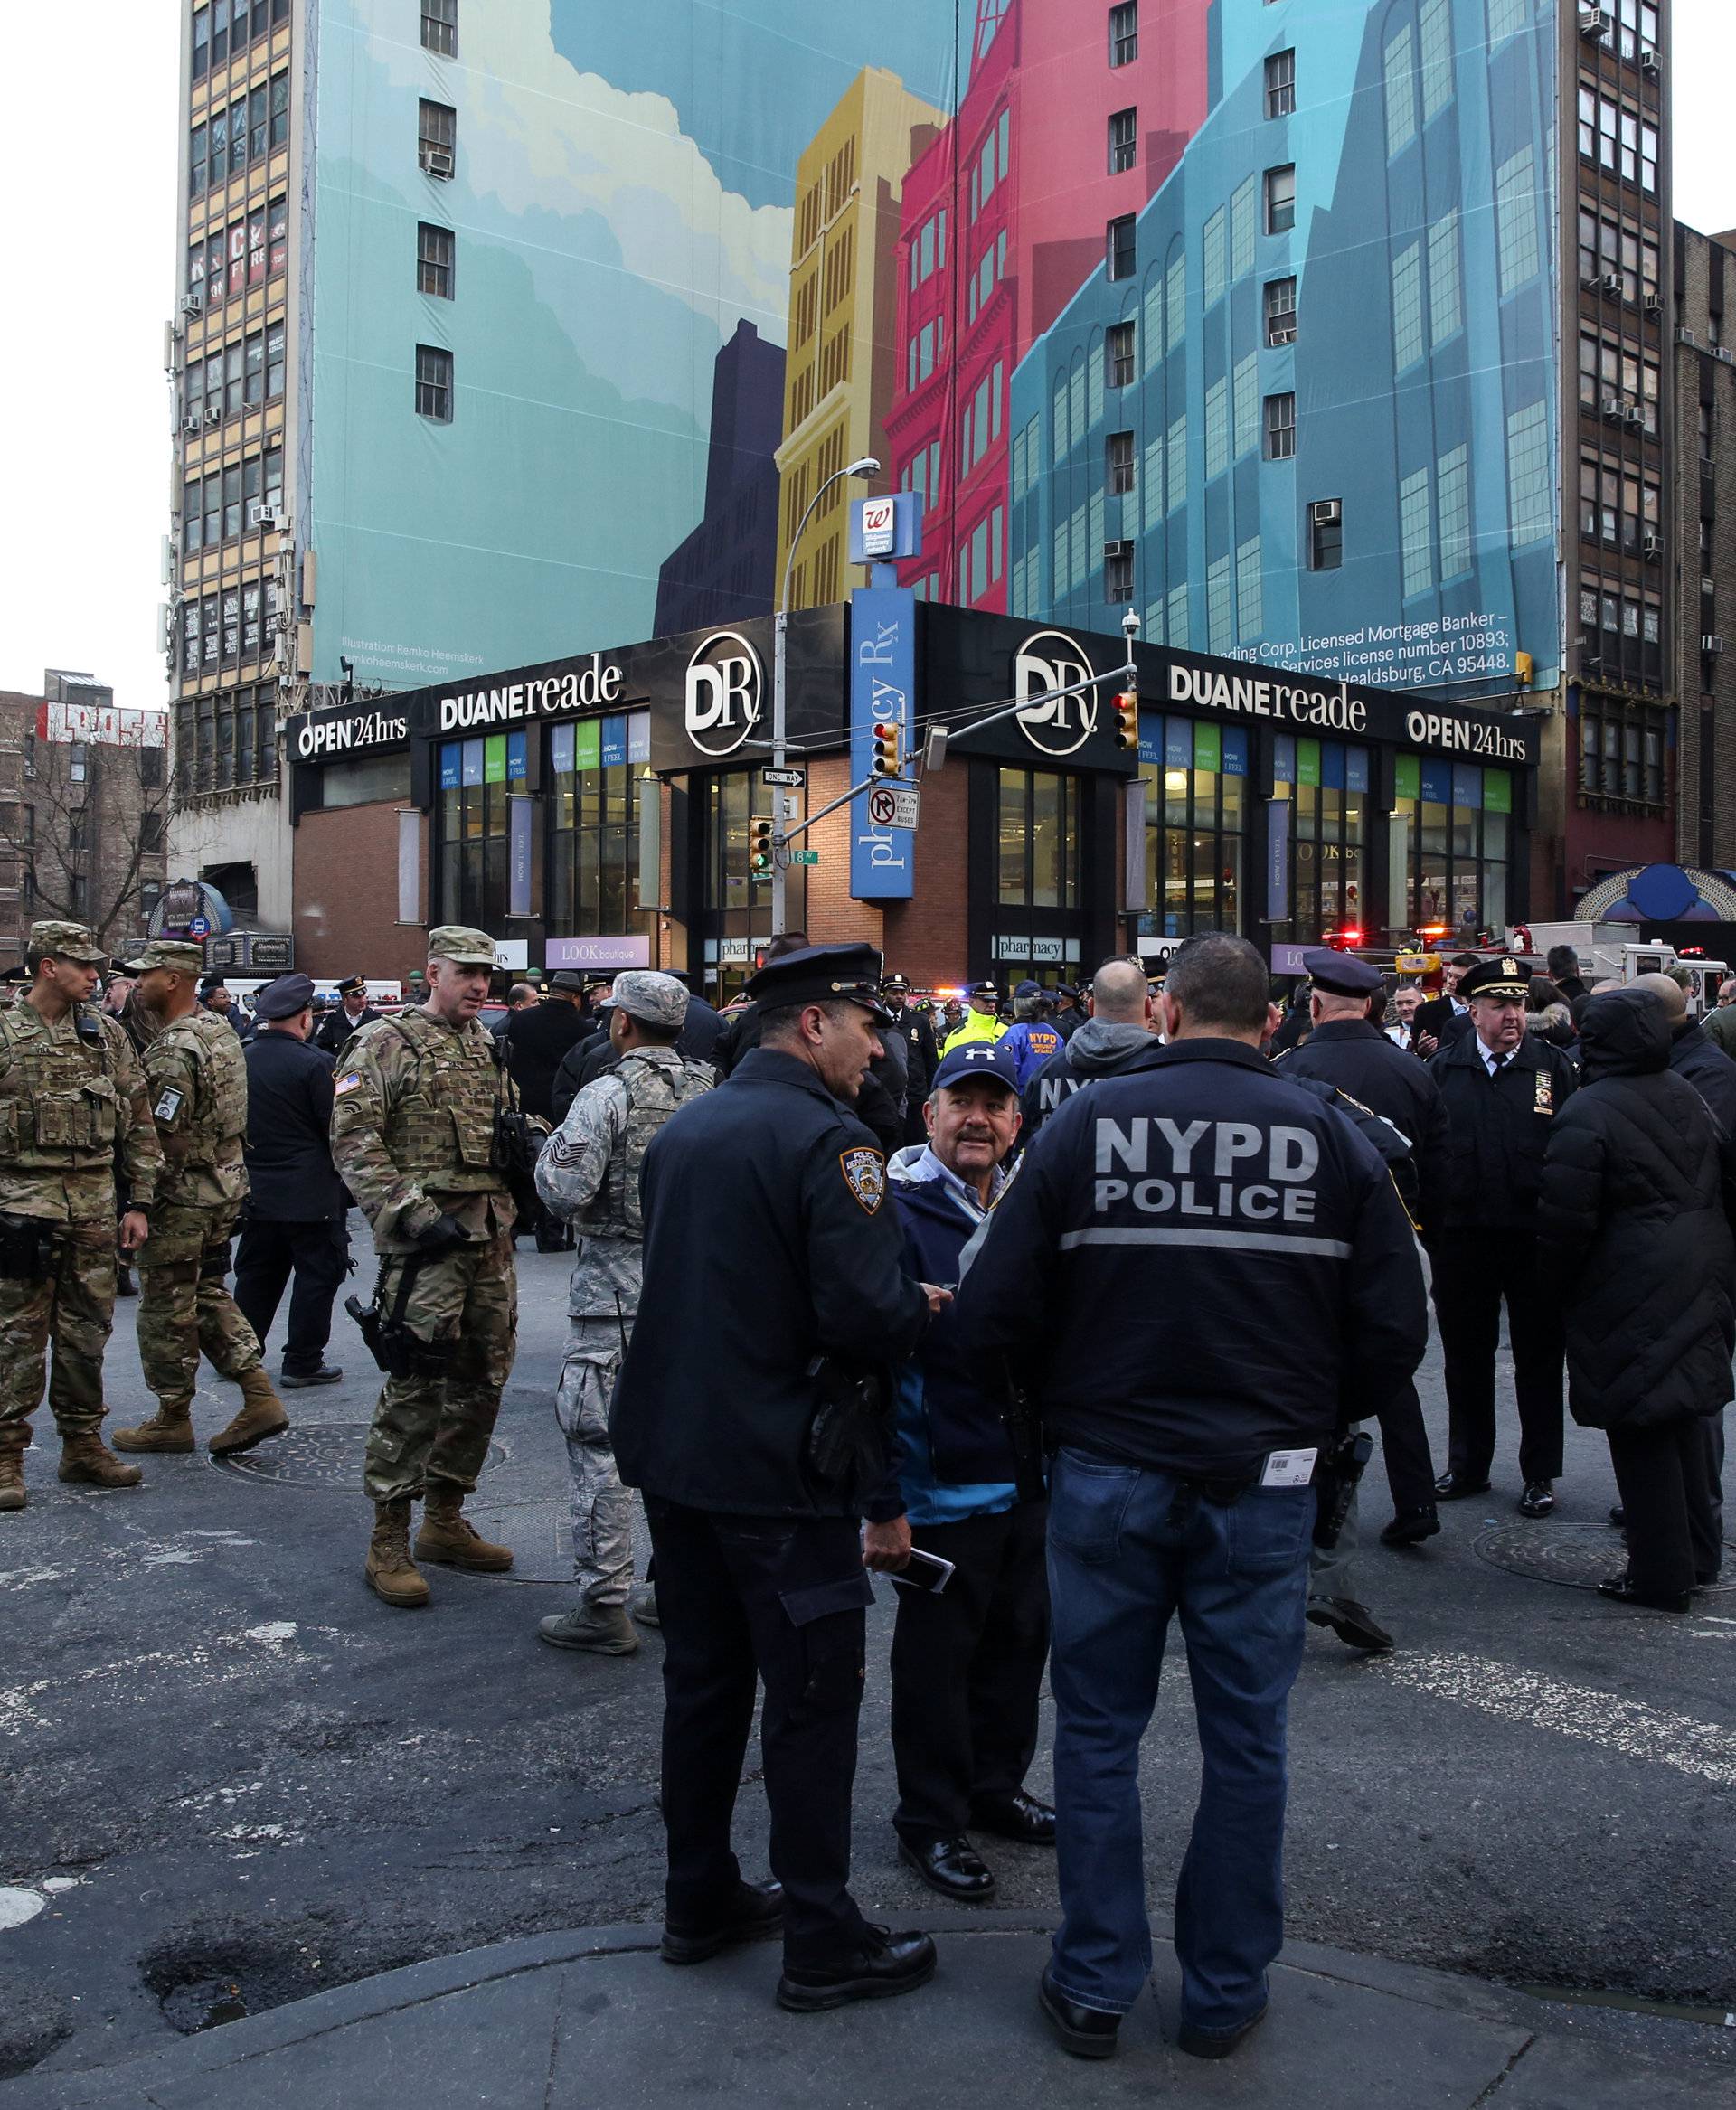 New York Police Department (NYPD) officers stand guard near Port Authority Bus Terminal after reports of an explosion in New York